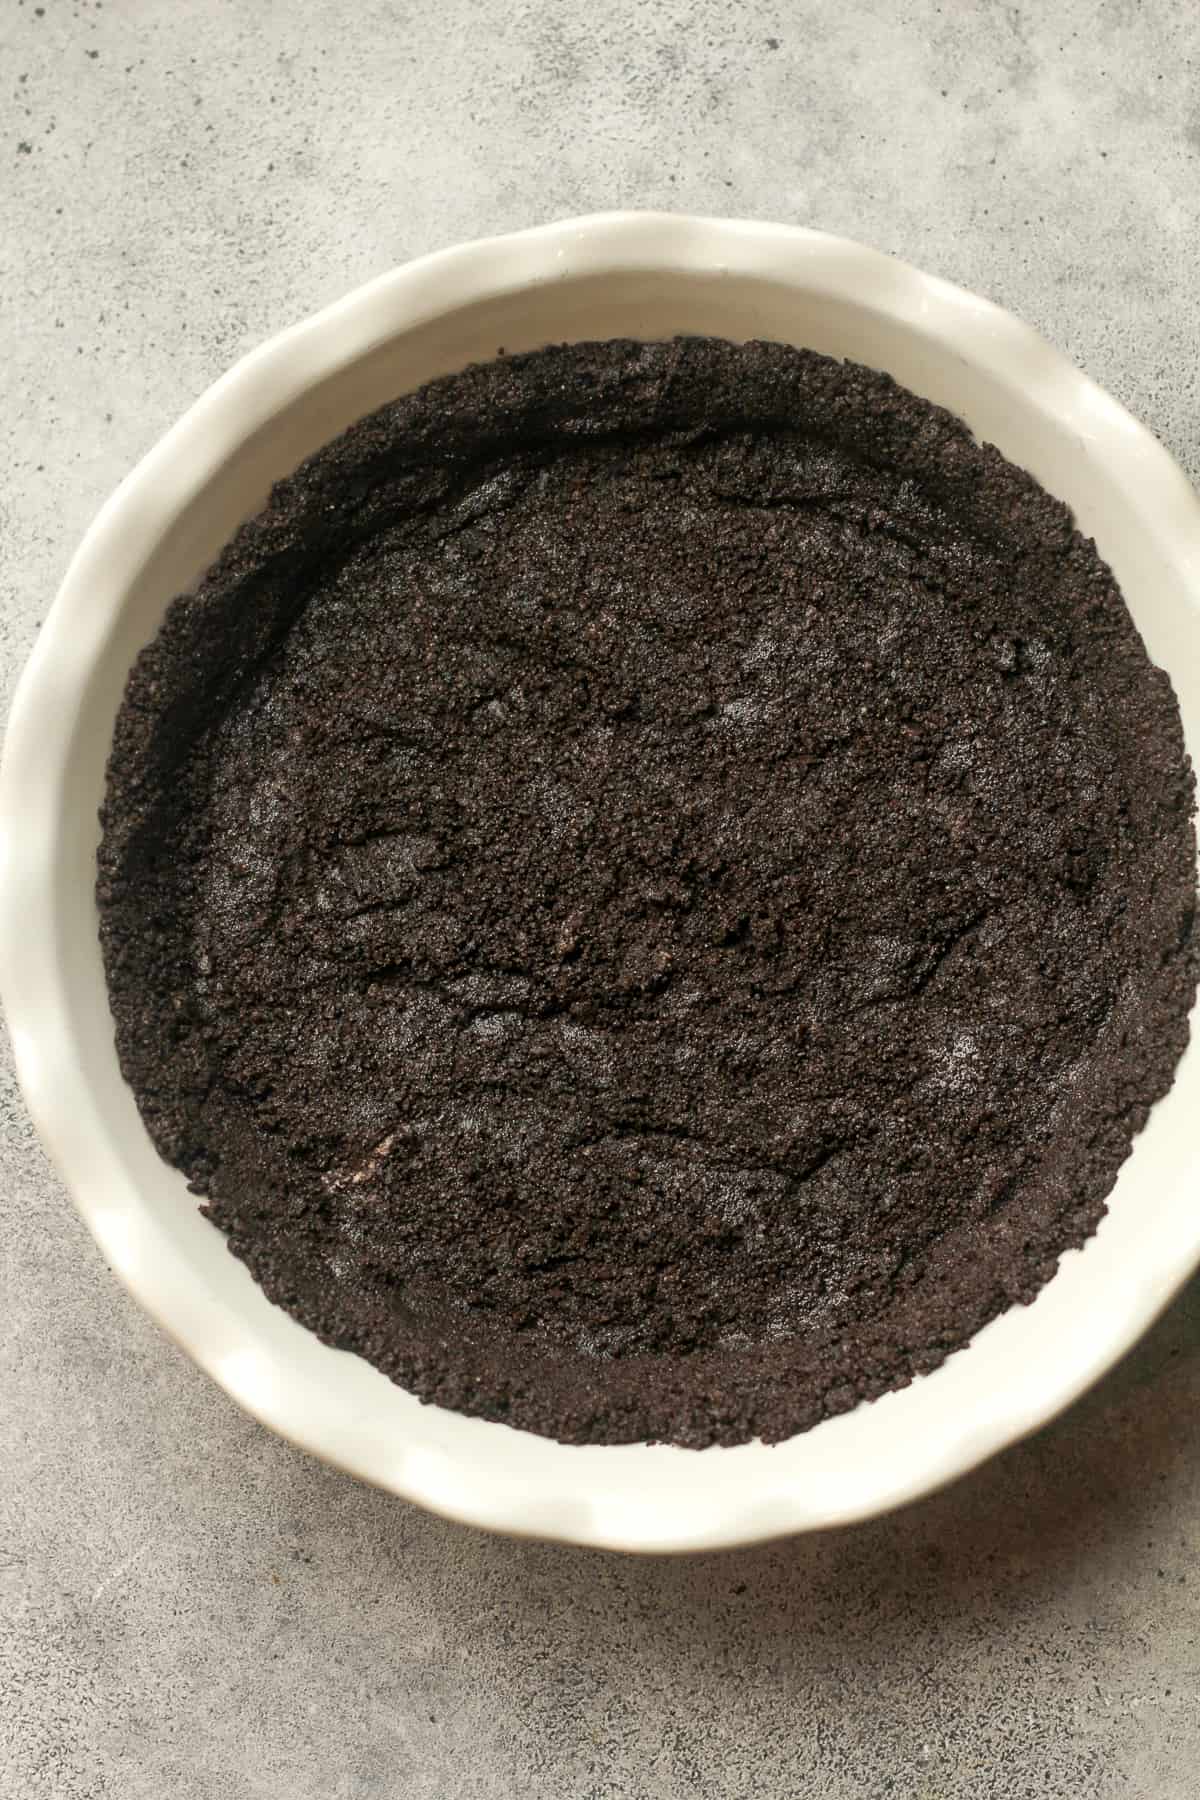 A pie dish with pressed Oreo crust inside.